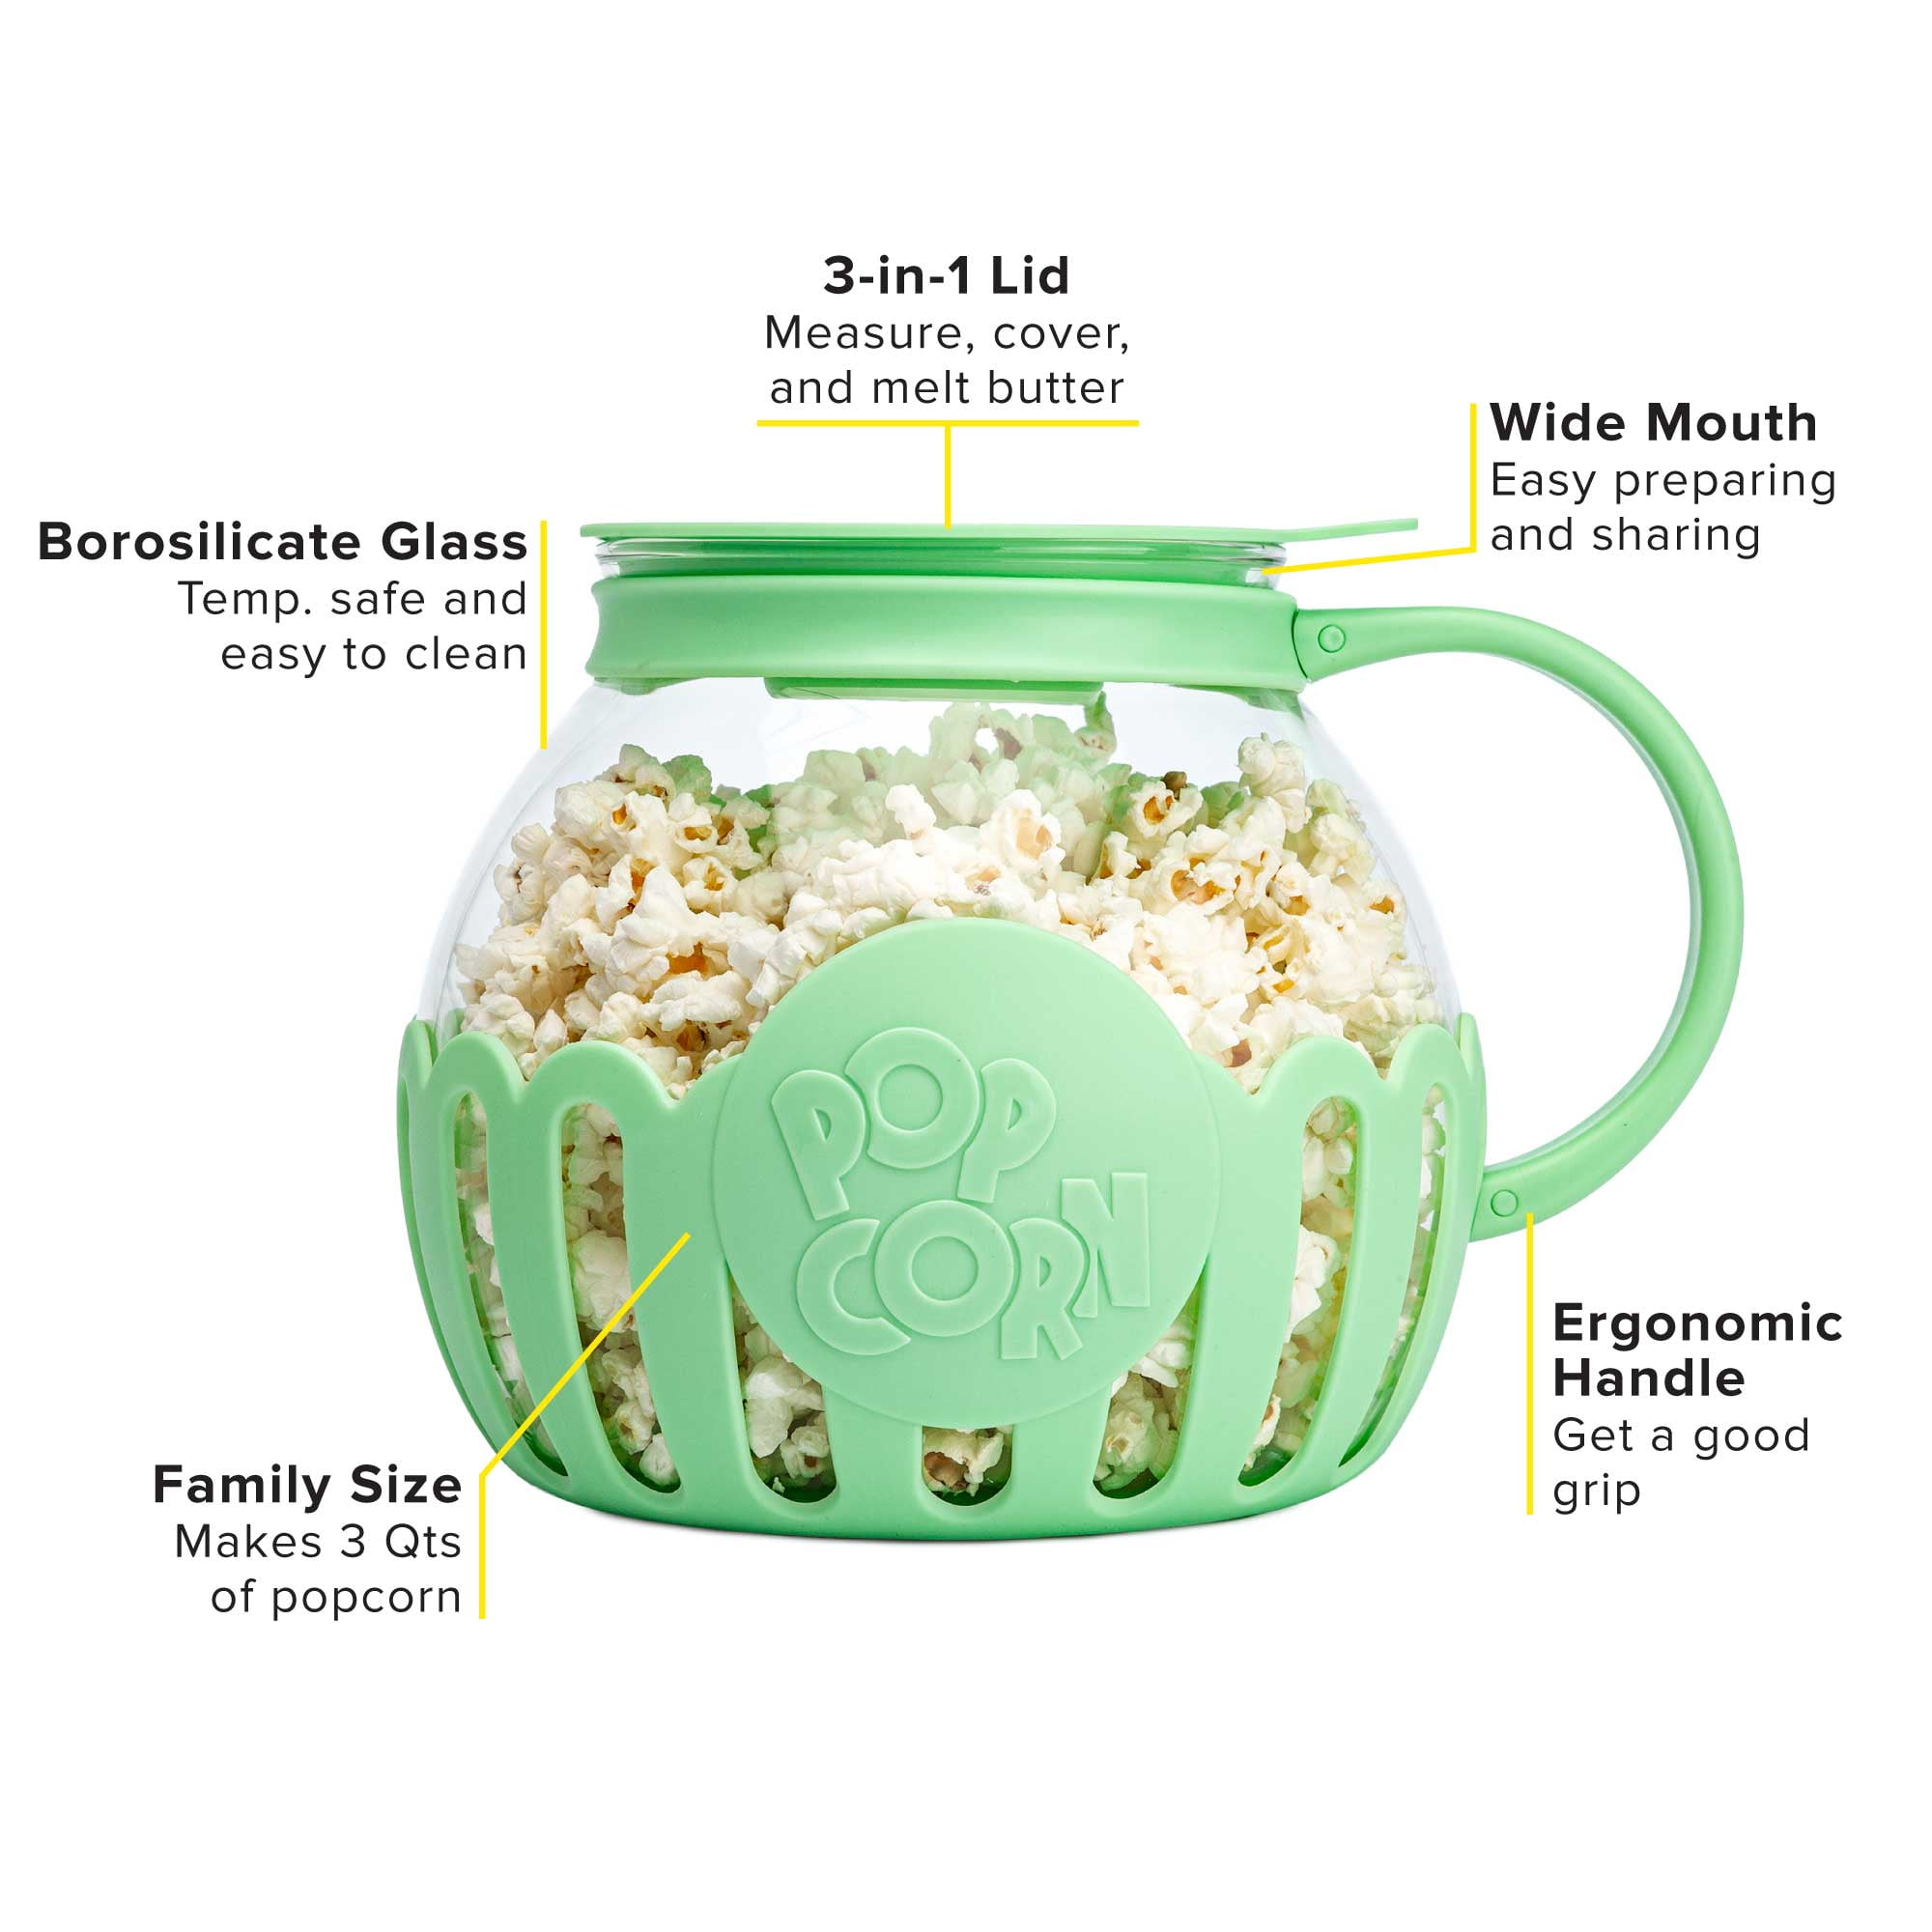 Micro-Pop Popcorn Popper, With 3-in-1 Lid - Ecolution - 3 Quart Family Size  / Teal